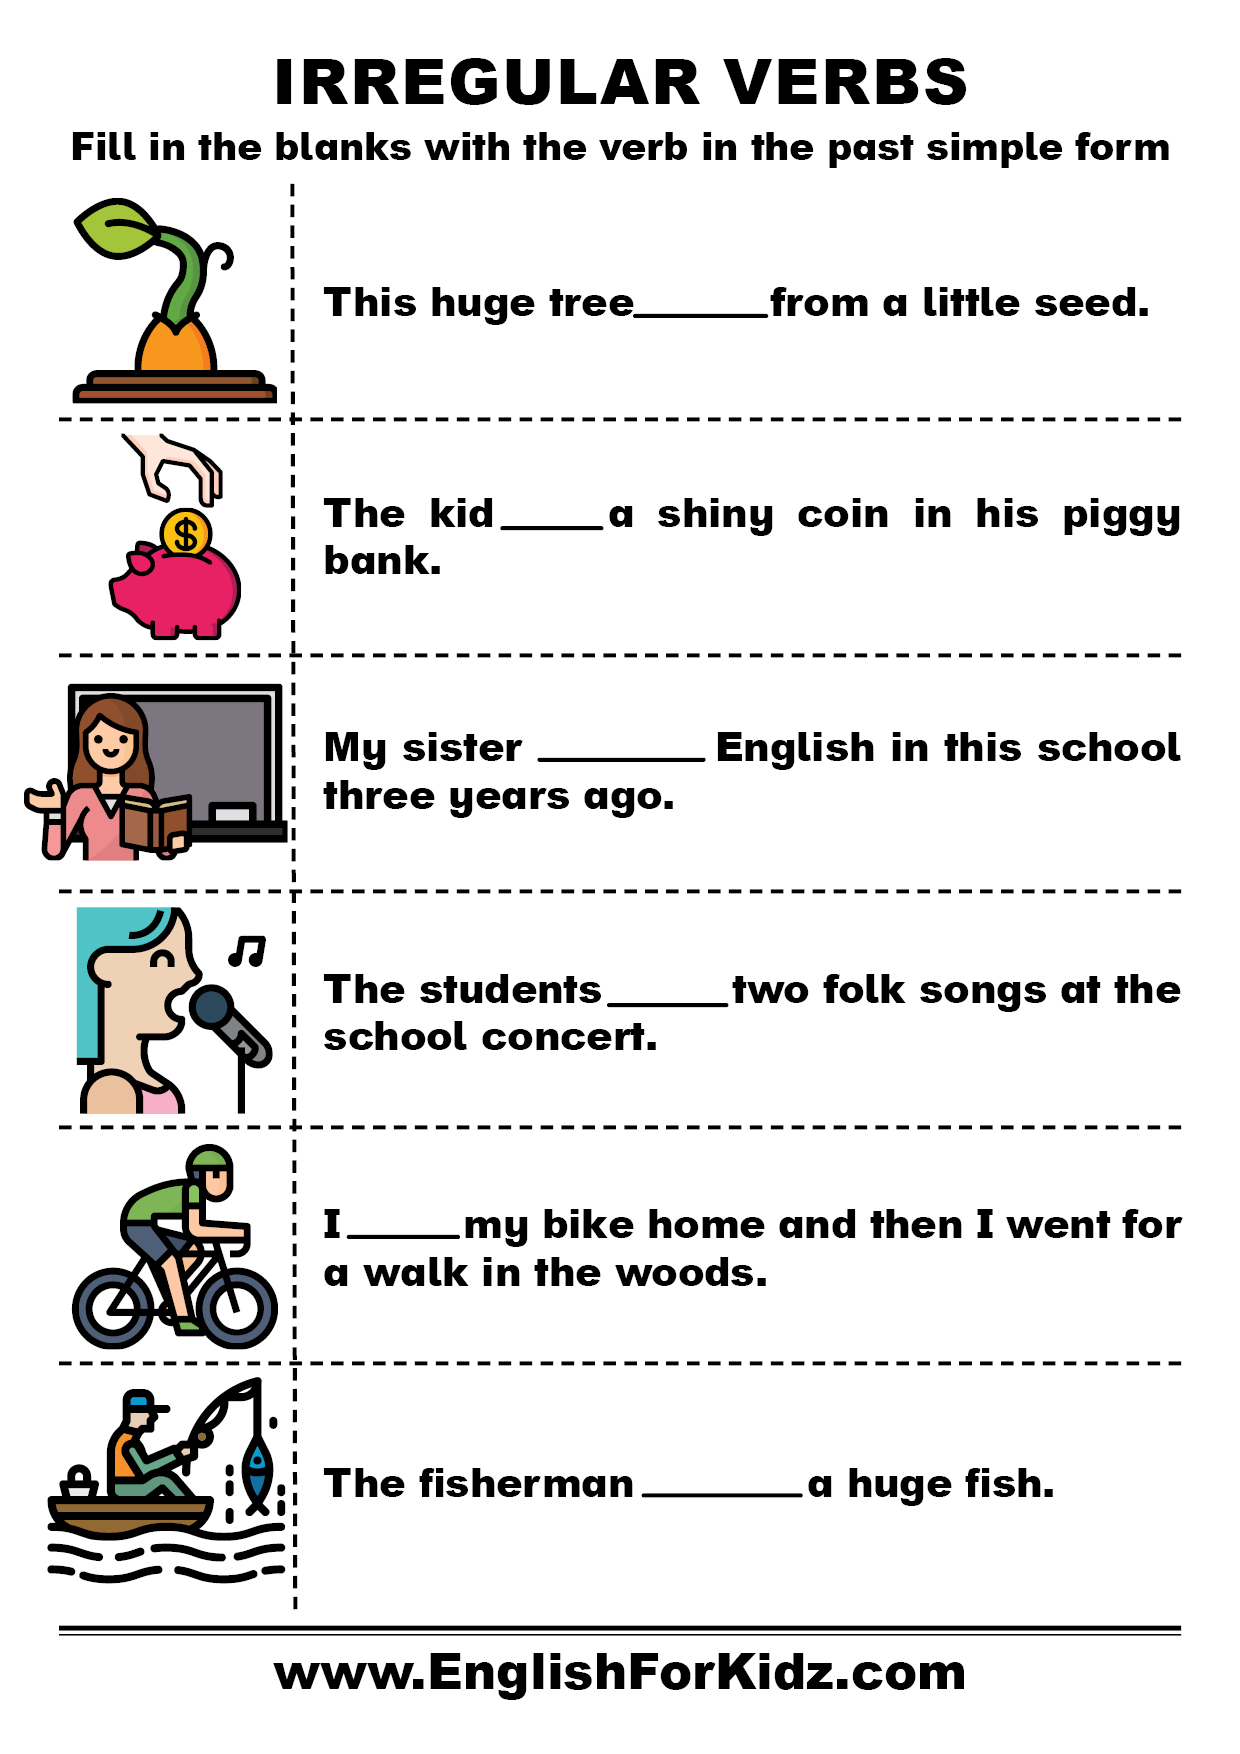 english-for-kids-step-by-step-irregular-verbs-exercises-and-worksheets